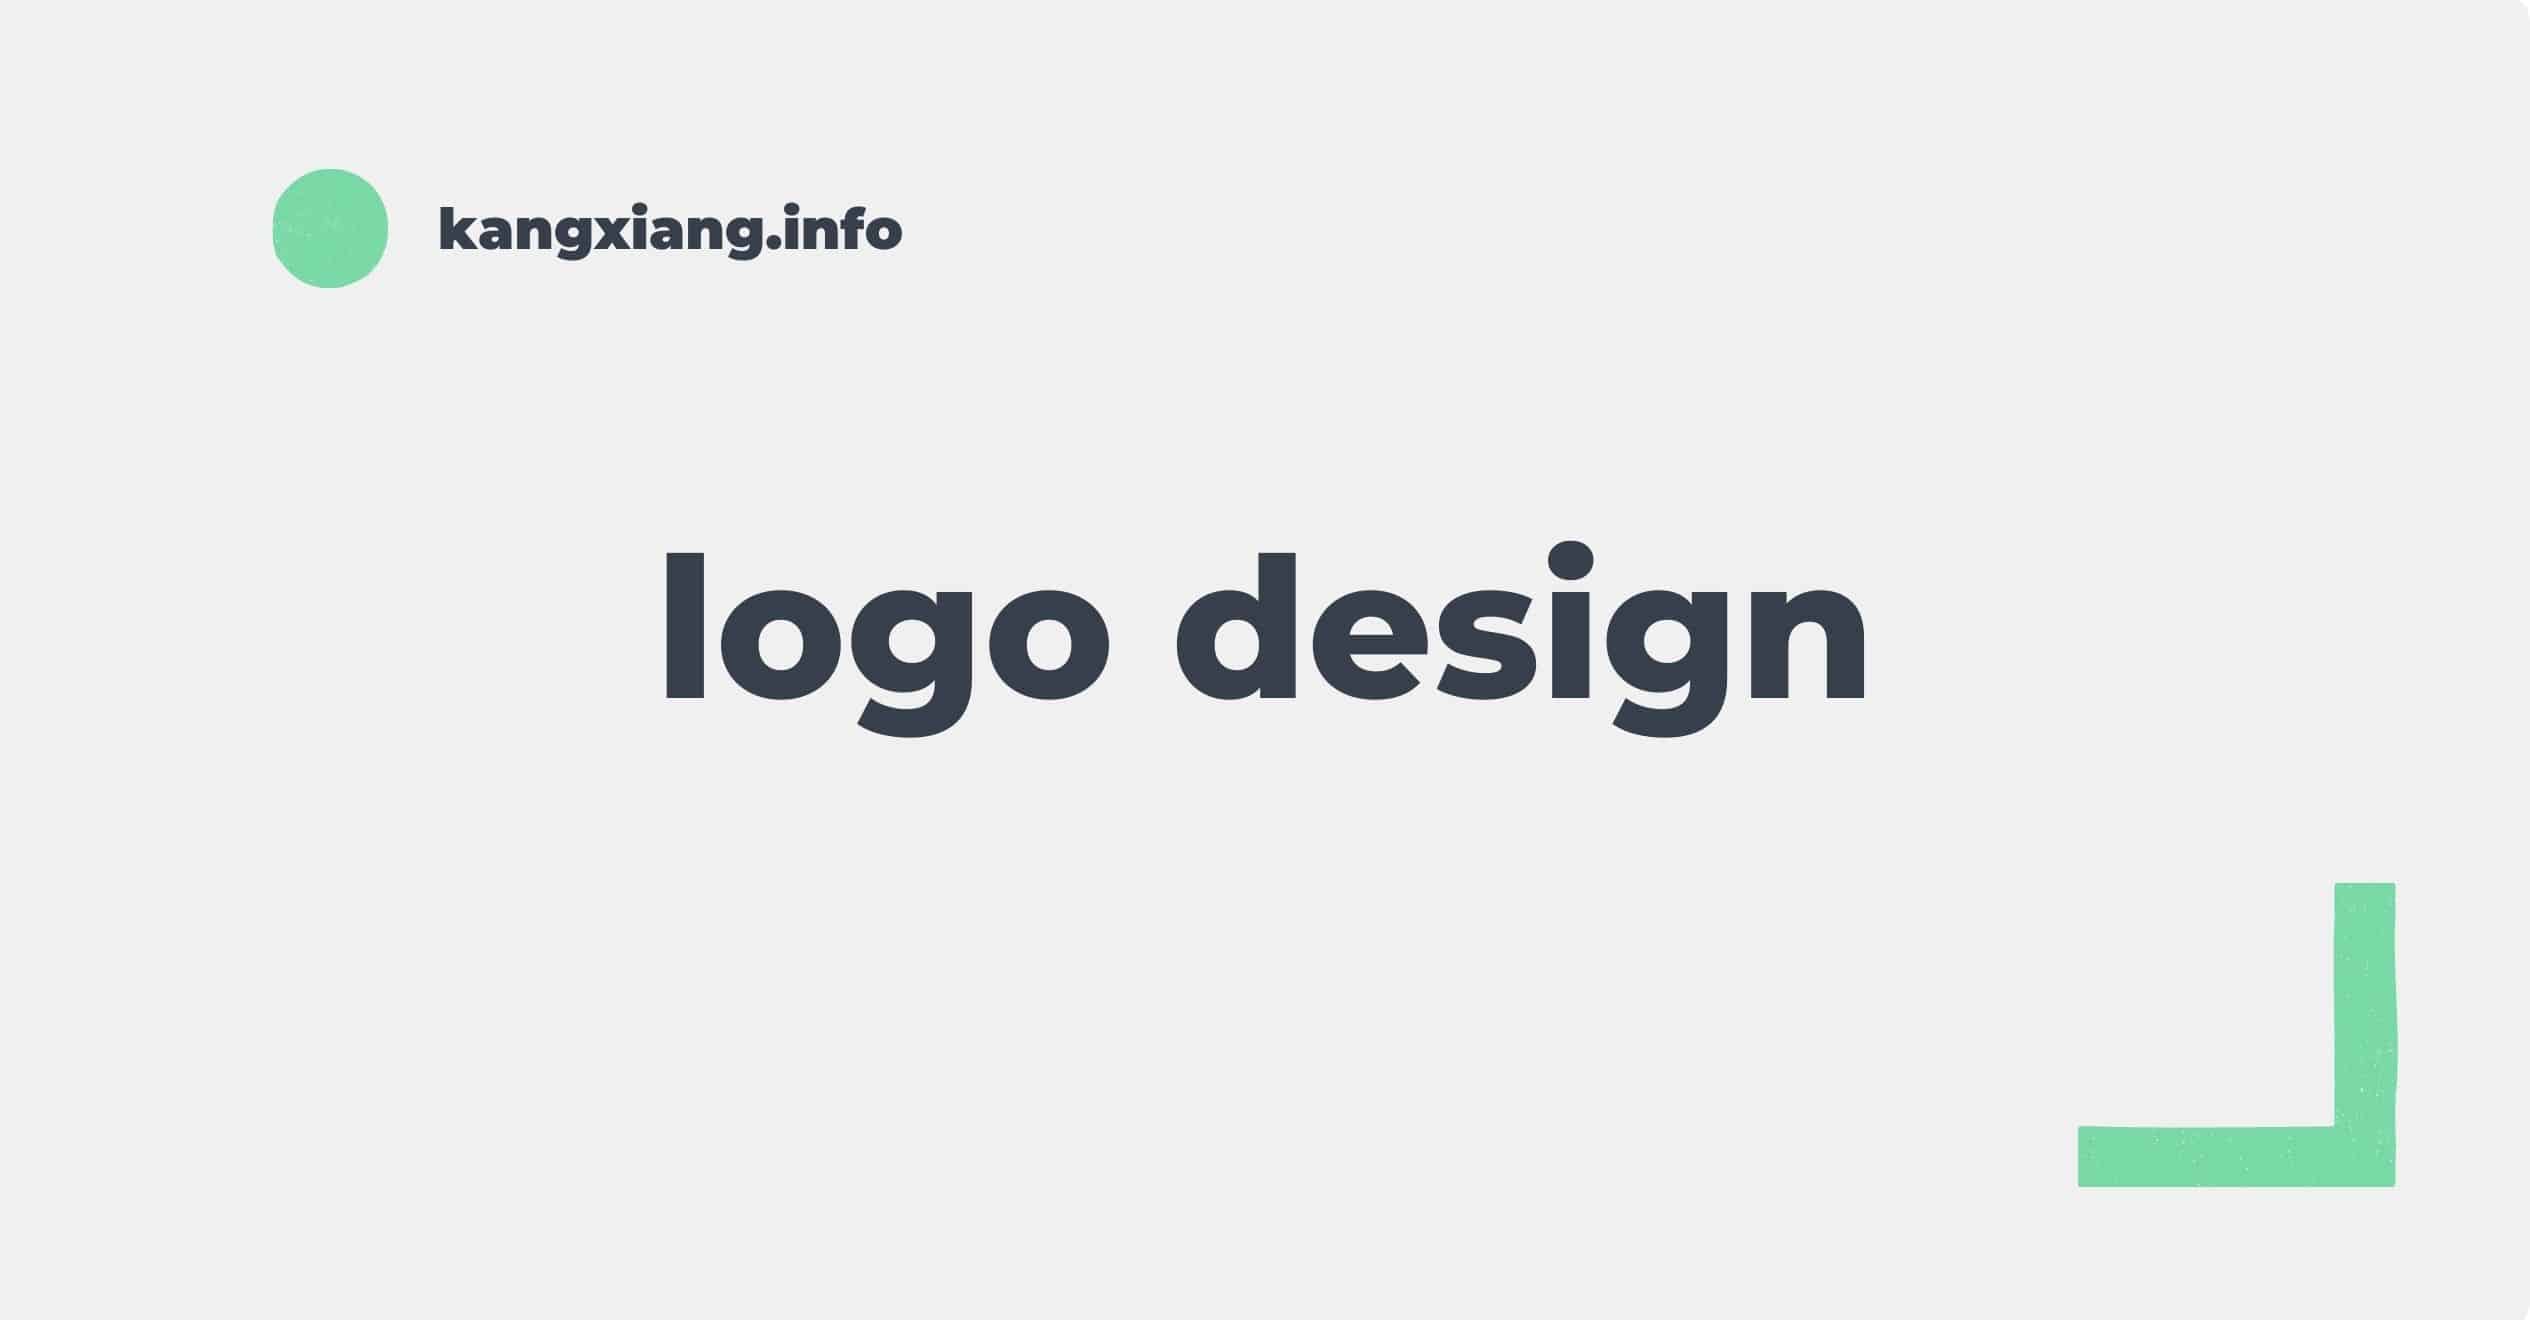 How much does a logo design cost in Malaysia